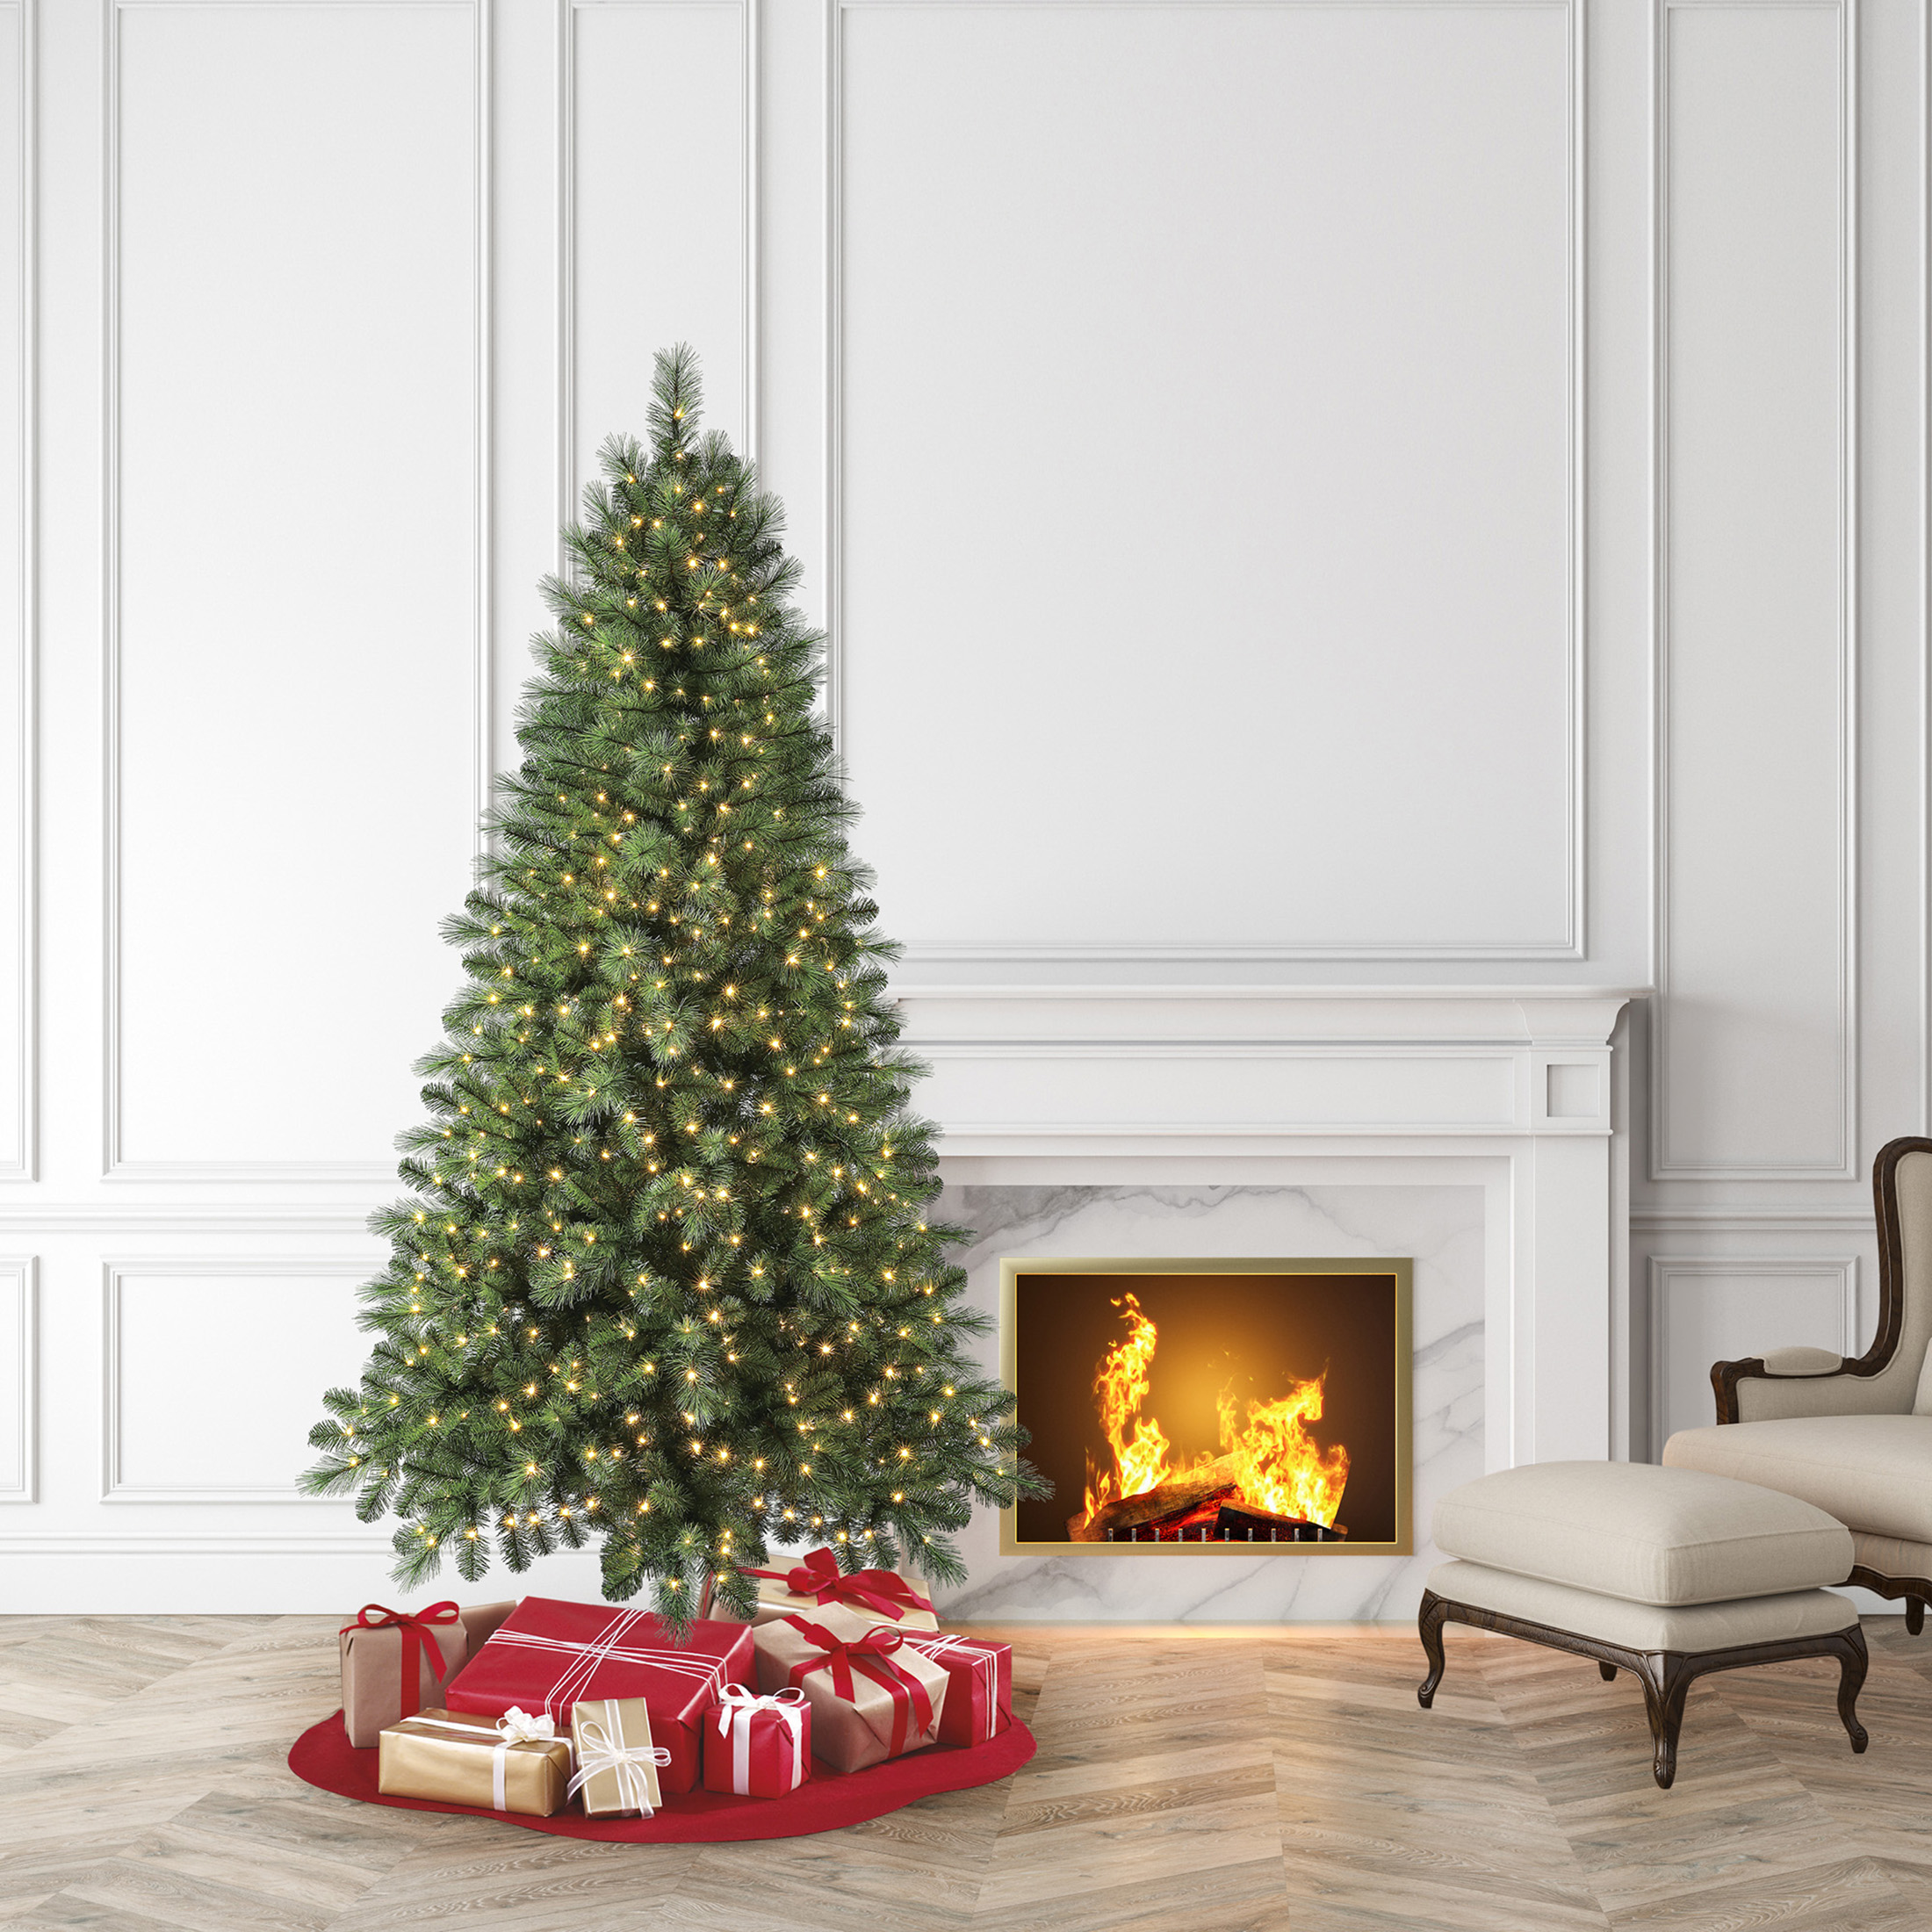 Evergreen Classics Westwood Clear Prelit LED Green Full Christmas Tree, 7.5' - image 3 of 7